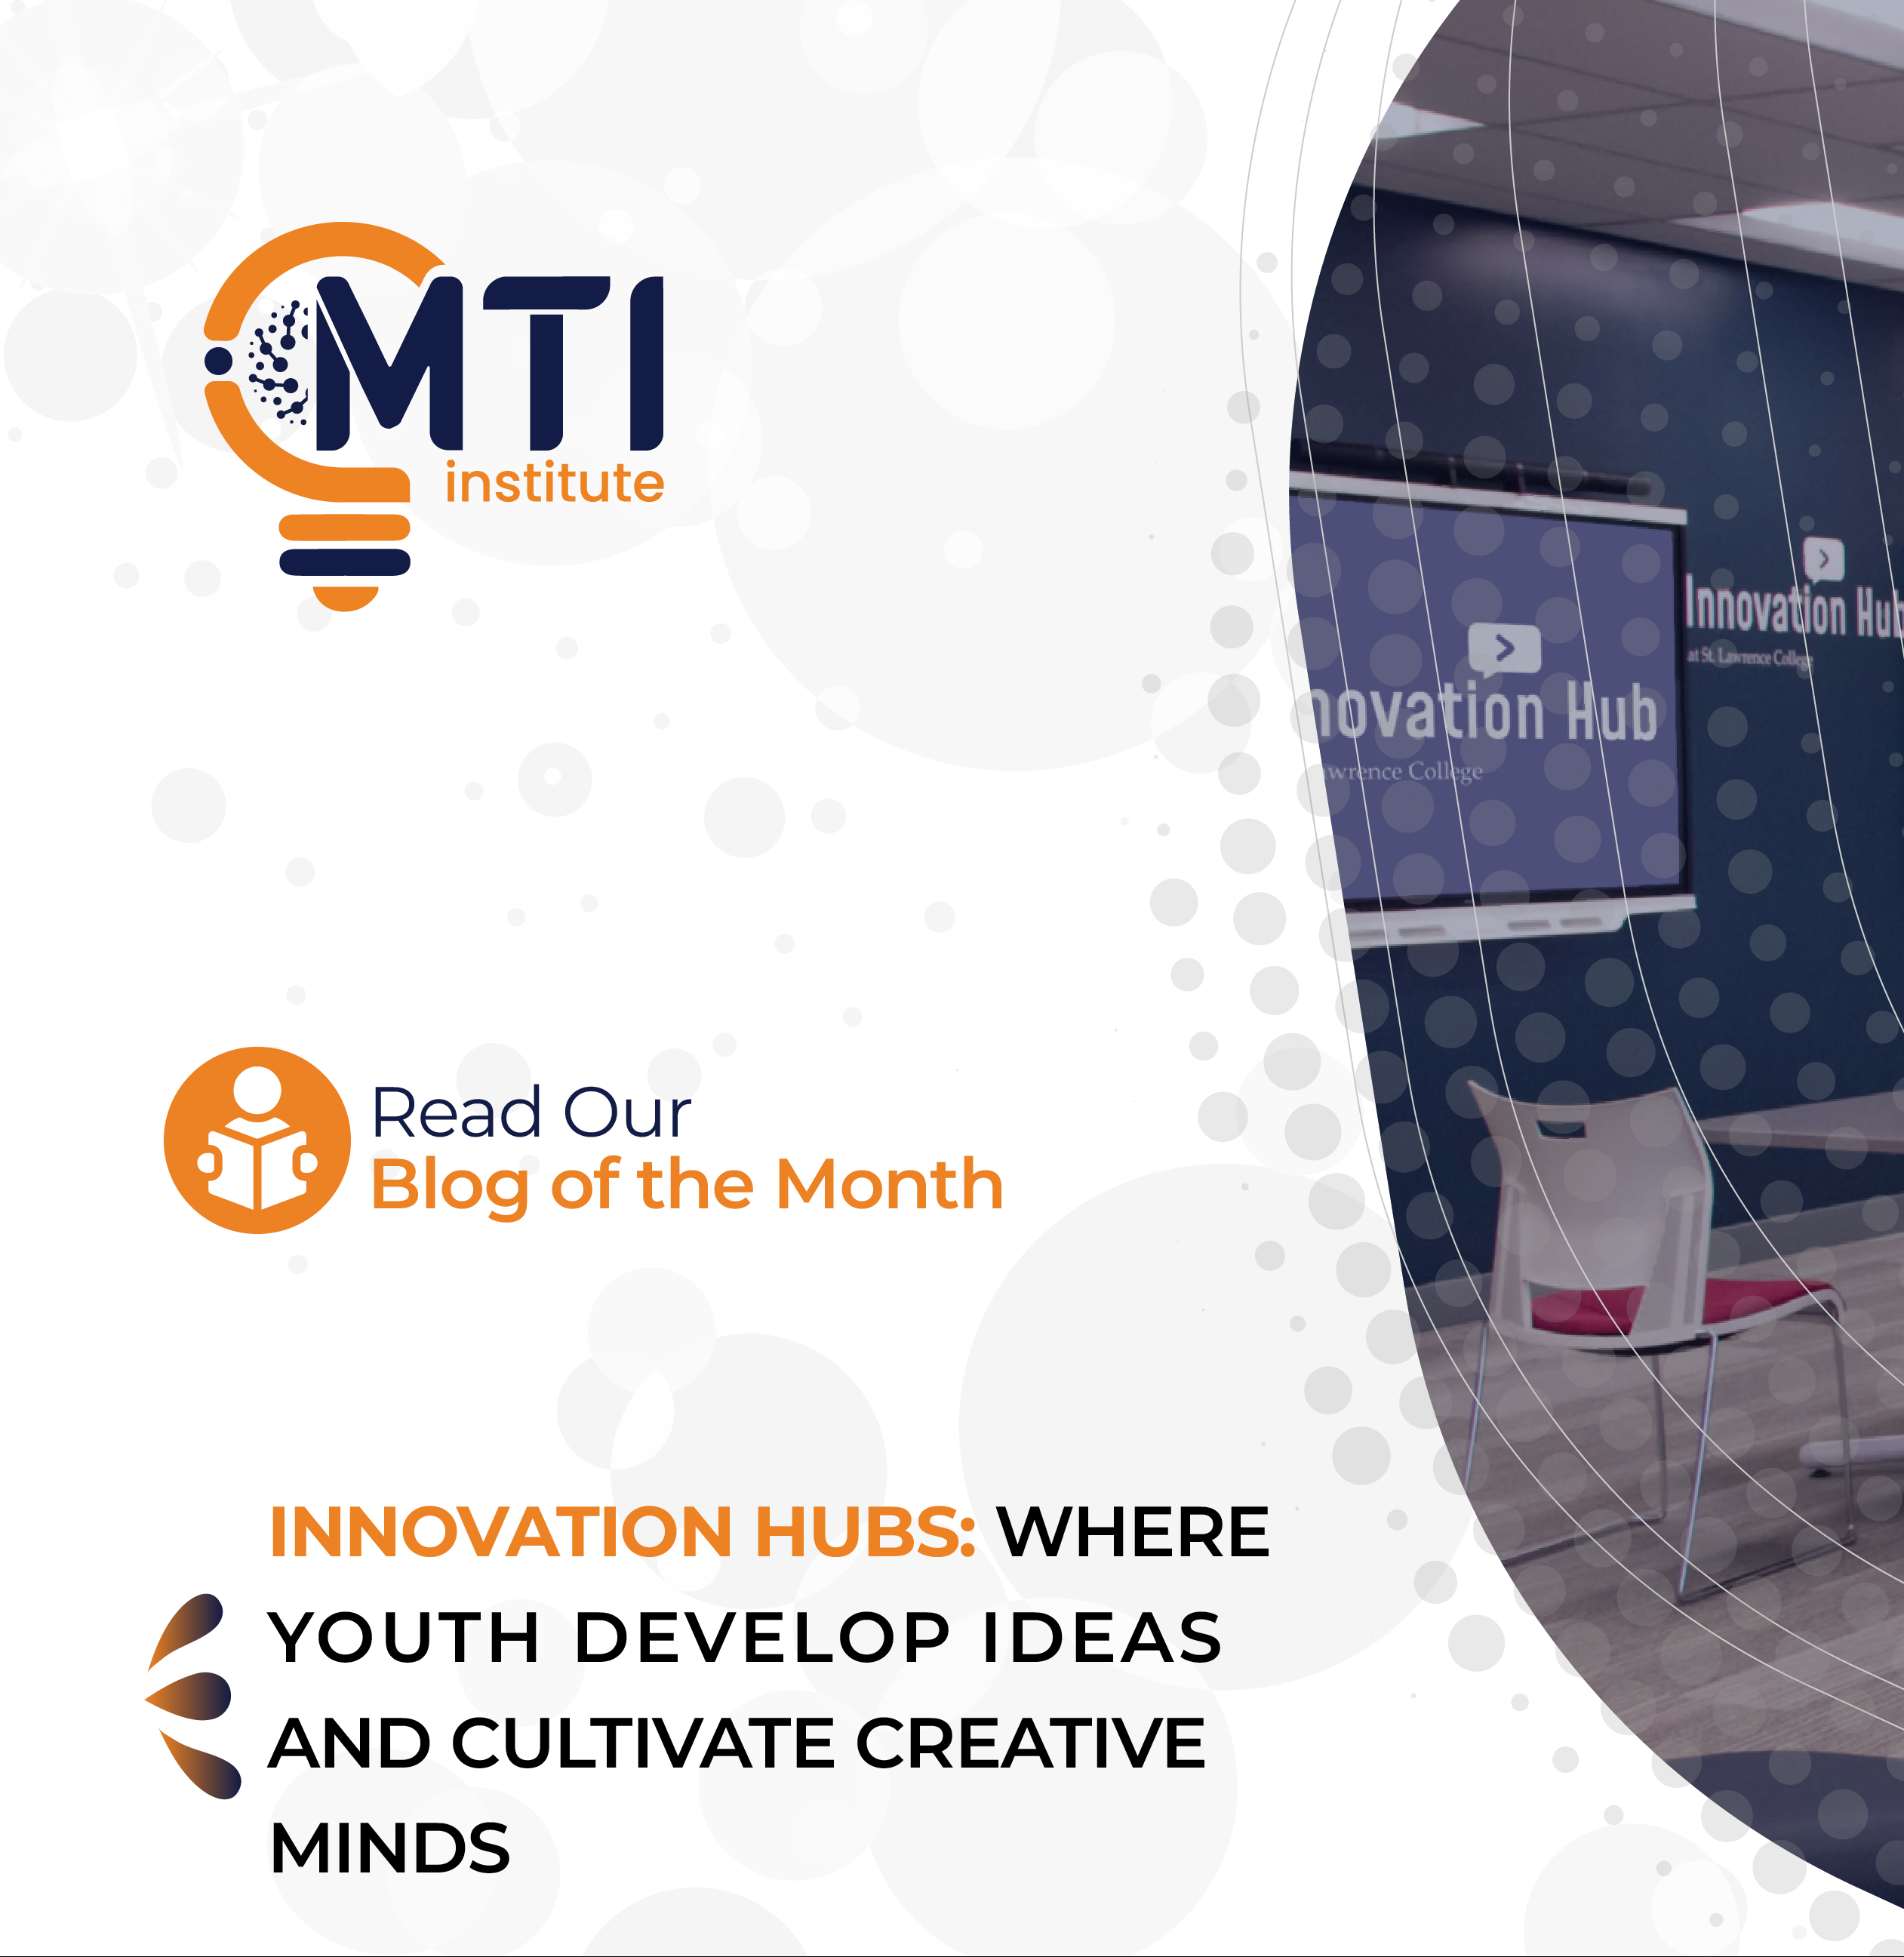 INNOVATION HUB: WHERE YOUTH DEVELOP IDEAS AND CULTIVATE CREATIVE MINDS